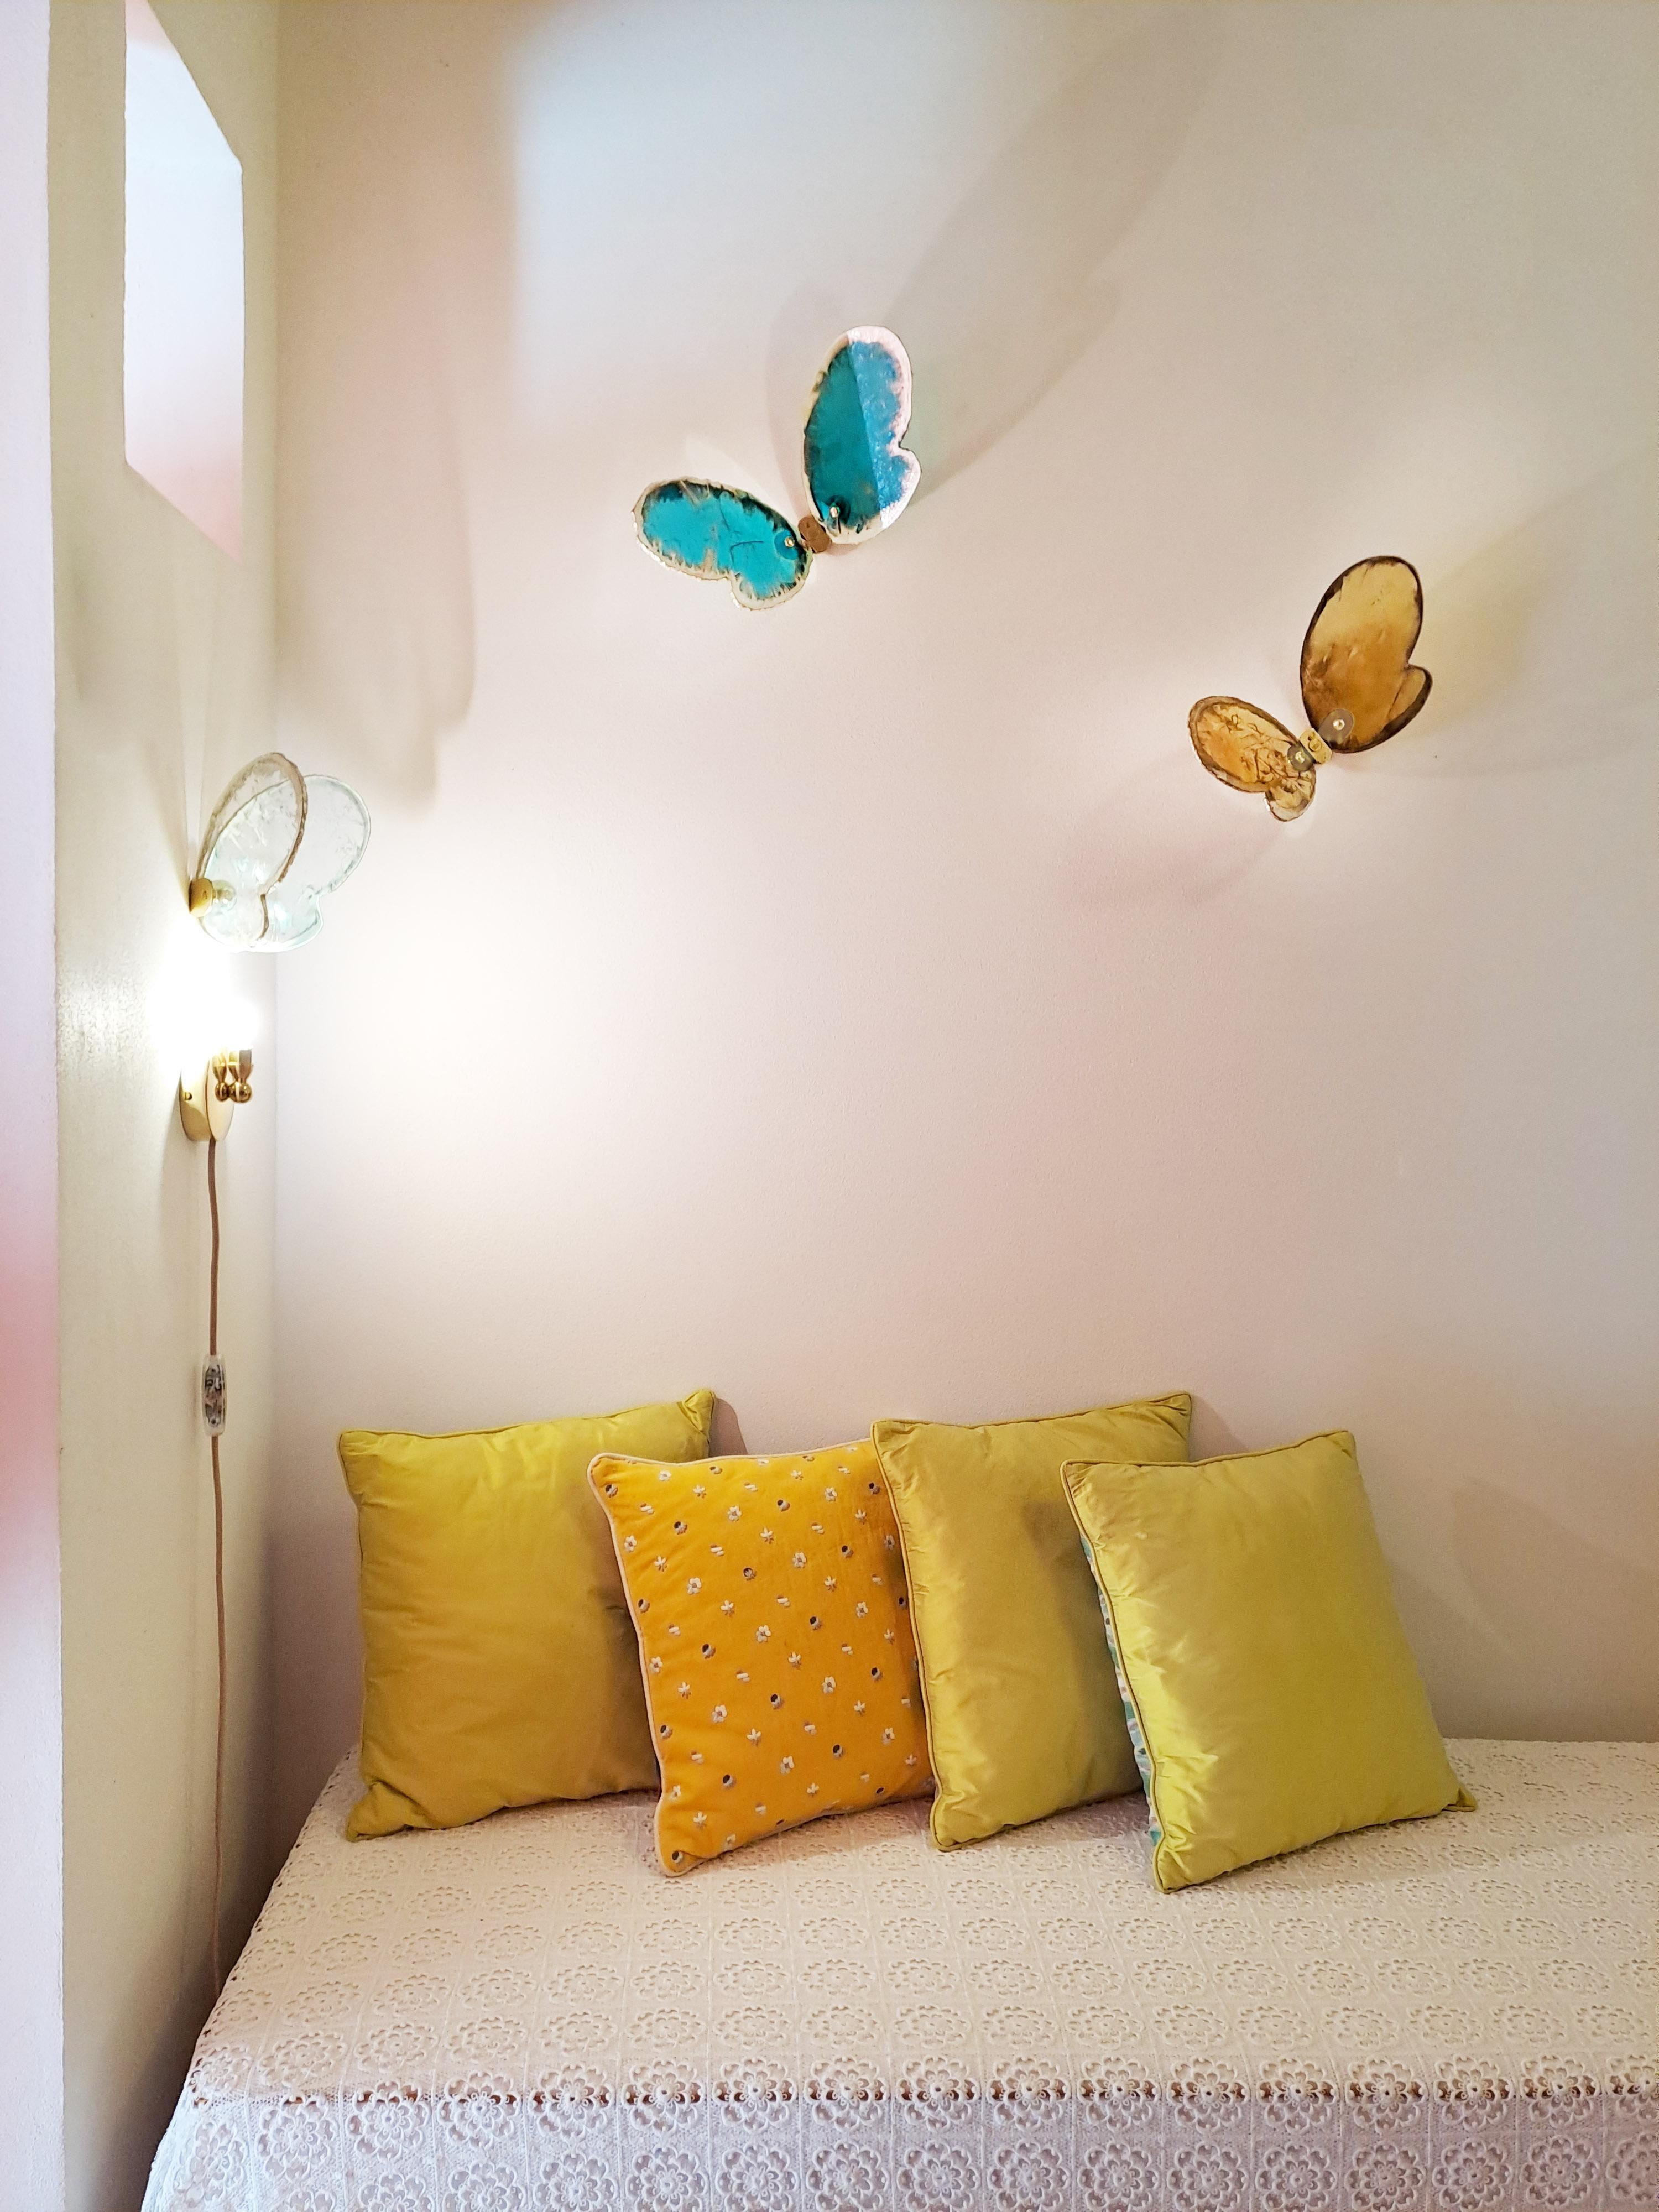  Butterfly Contemporary Wall light sculpture , art Silvered Glass white color   en vente 2